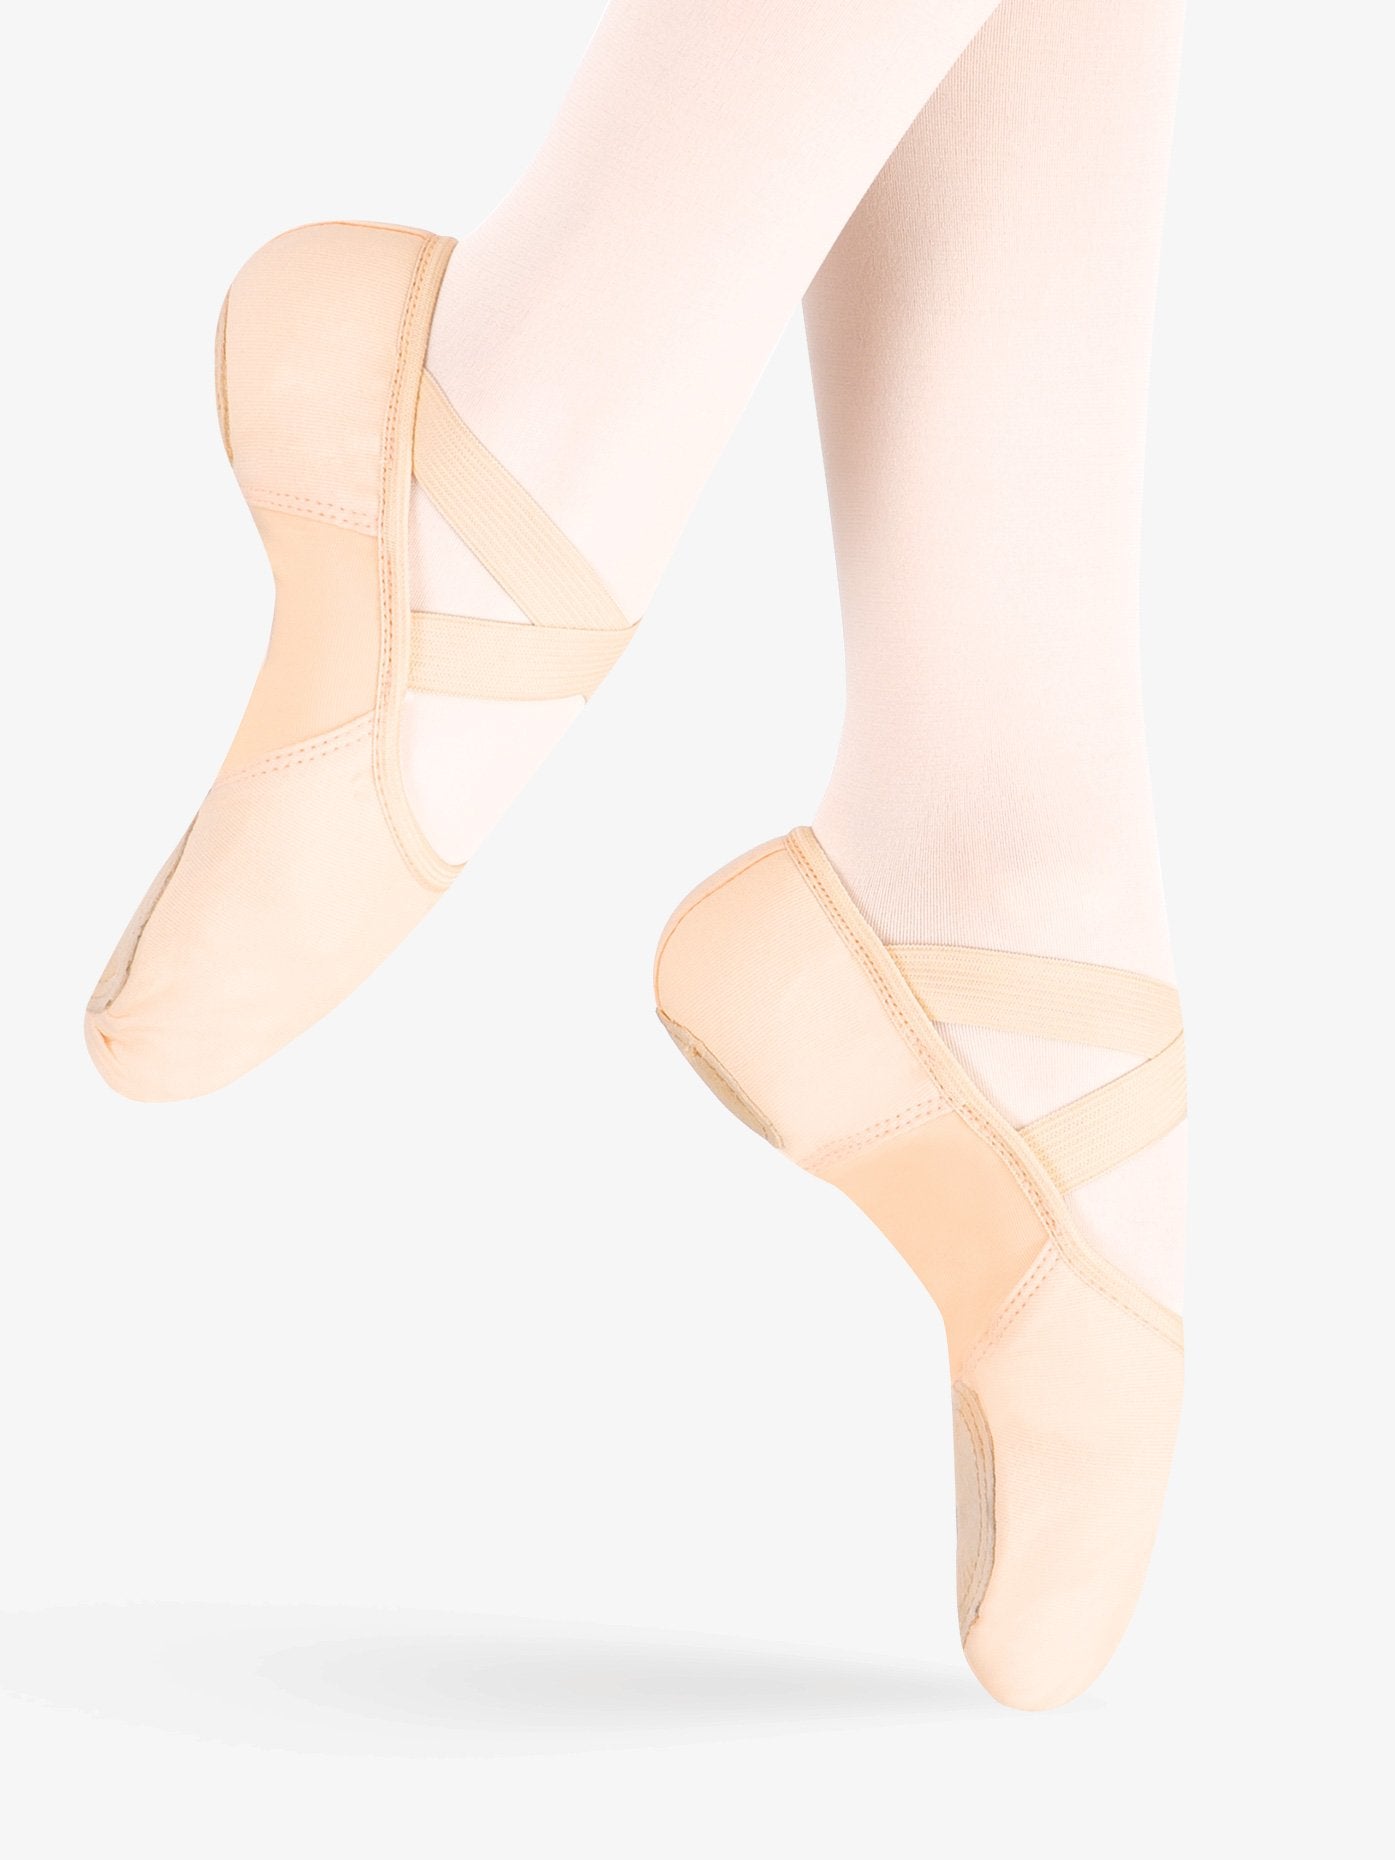 Women's canvas pink ballet shoes with nylon spandex insert and split sole for optimal flexibility and comfort